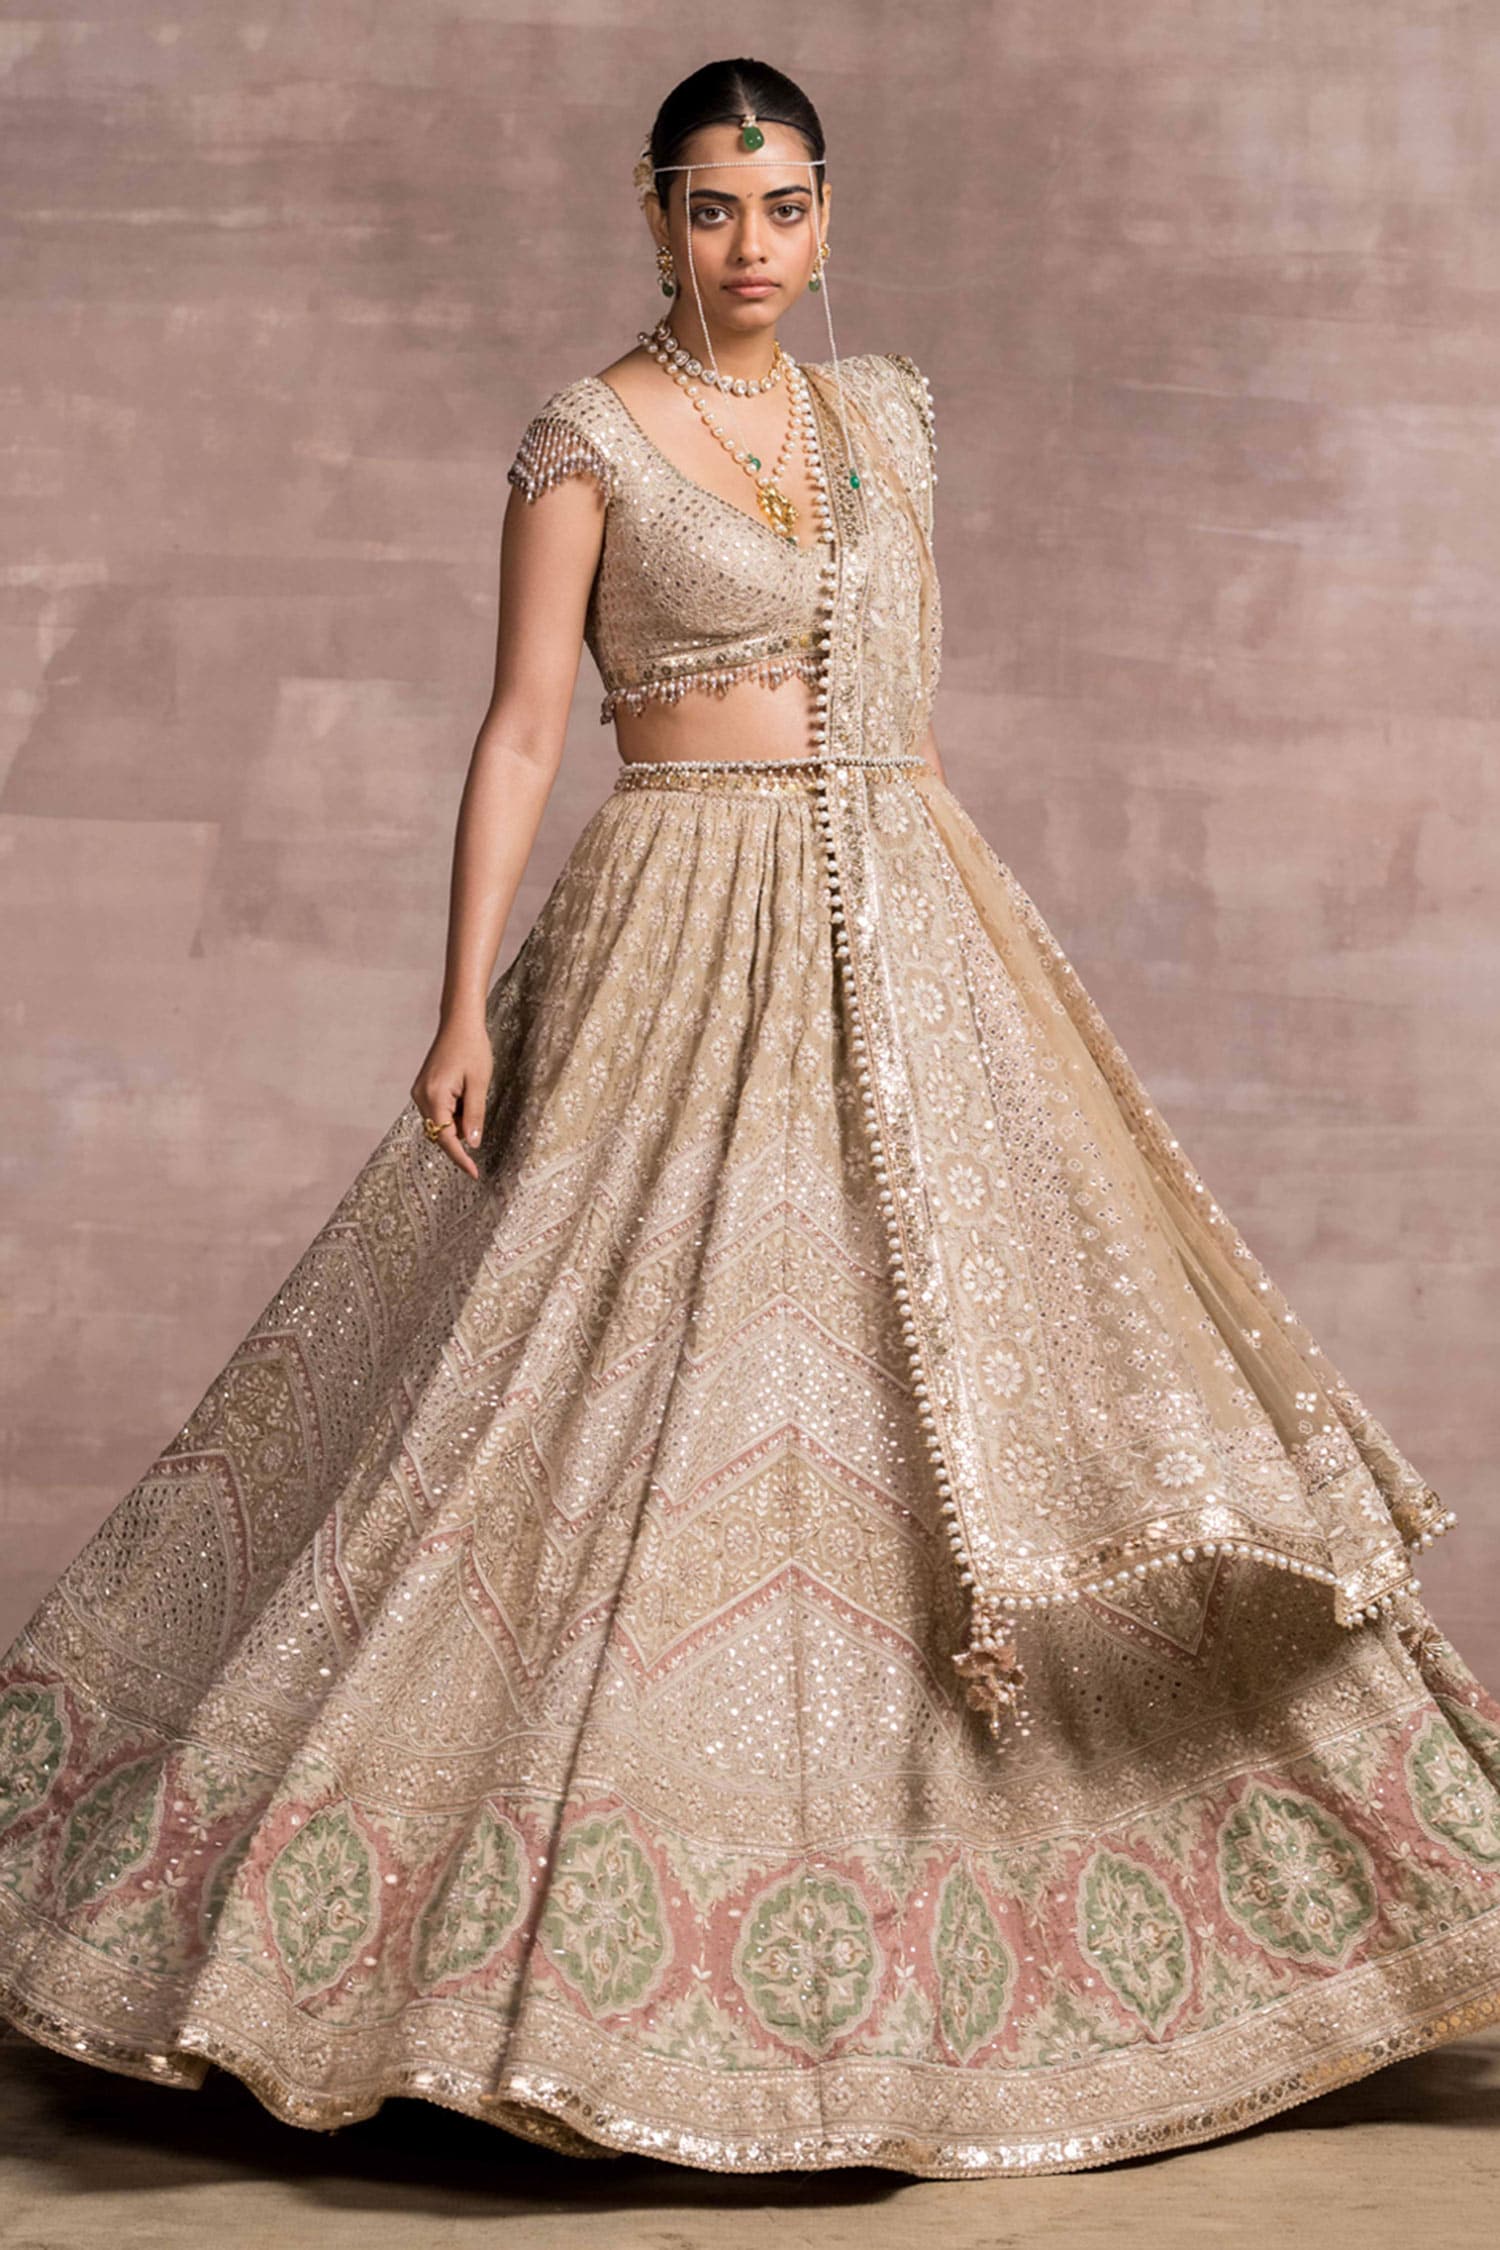 Tarun Tahiliani just dropped a bomb on Instagram with his latest Bridal  Collection! | Real Wedding Stories | Wedding Blog